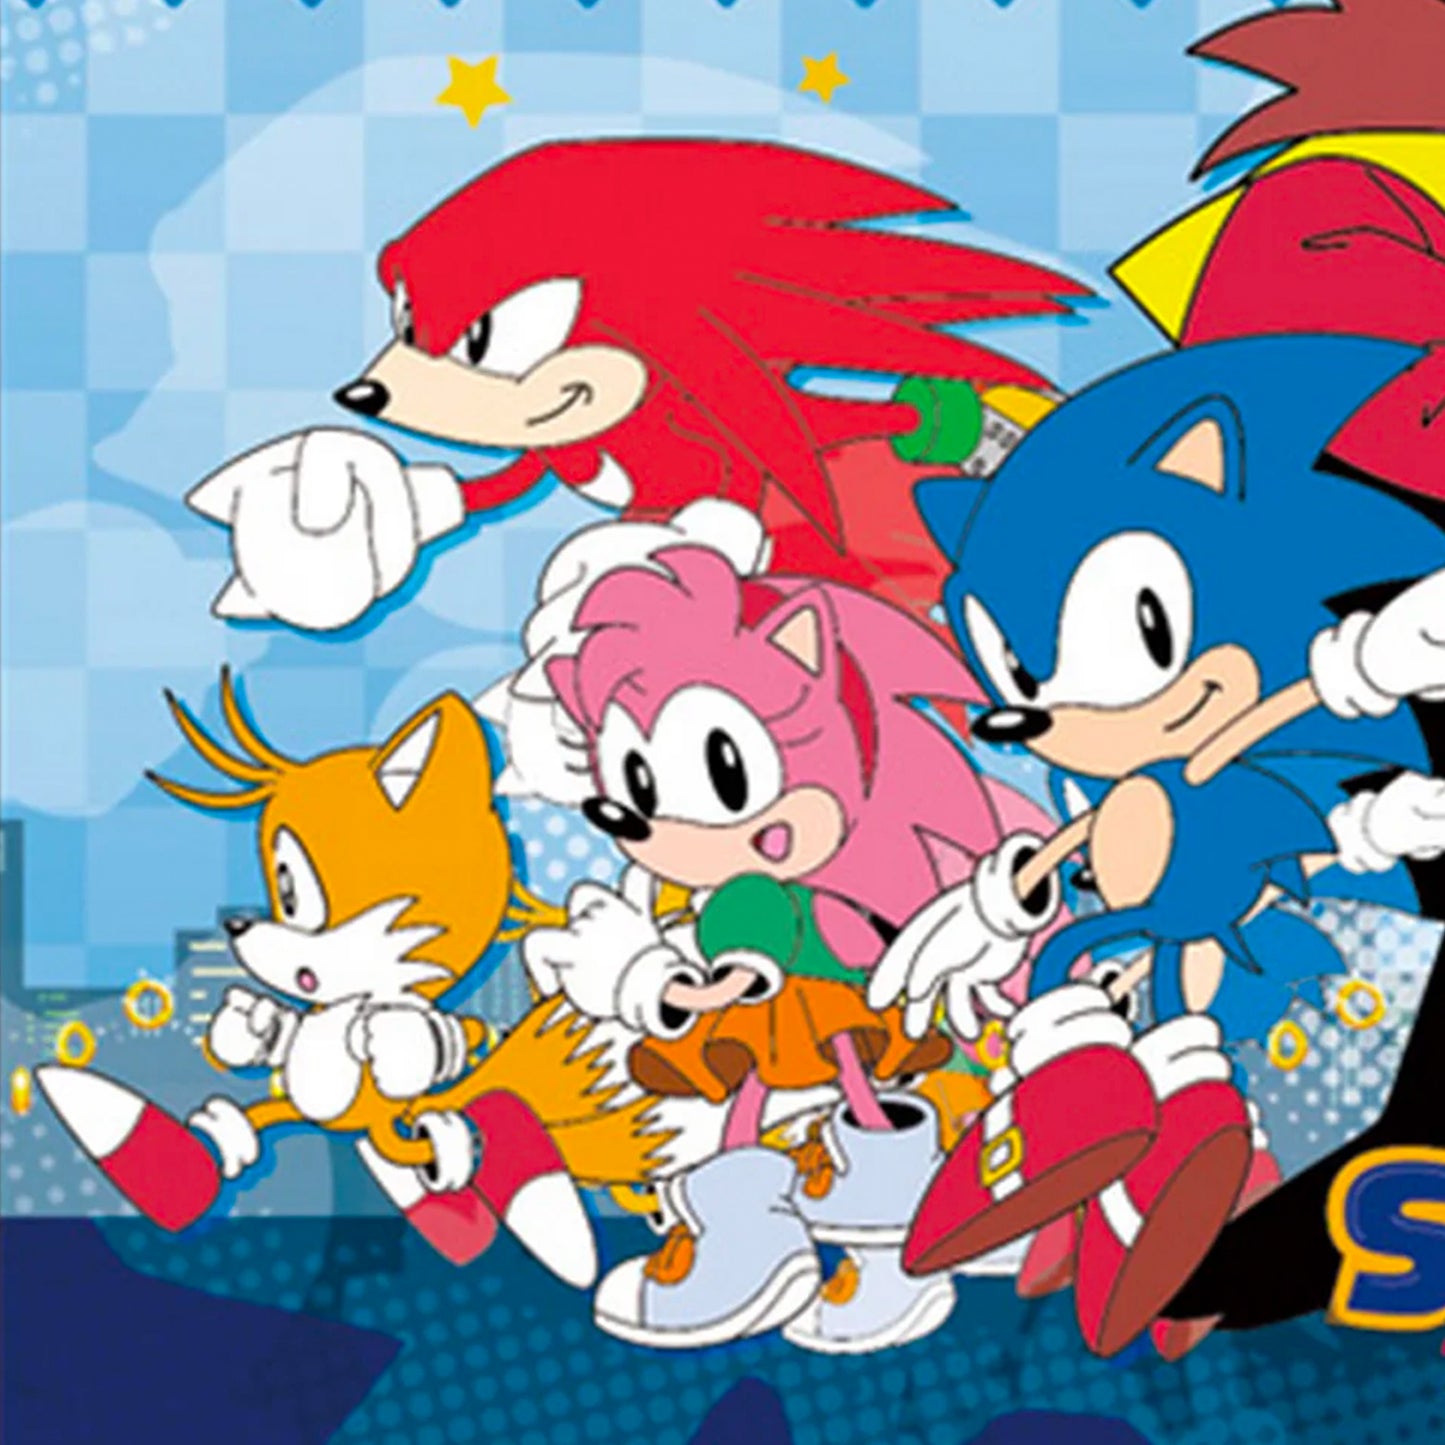 Classic City Group (Sonic the Hedgehog) 46" by 60" Sublimation Fleece Throw Blanket